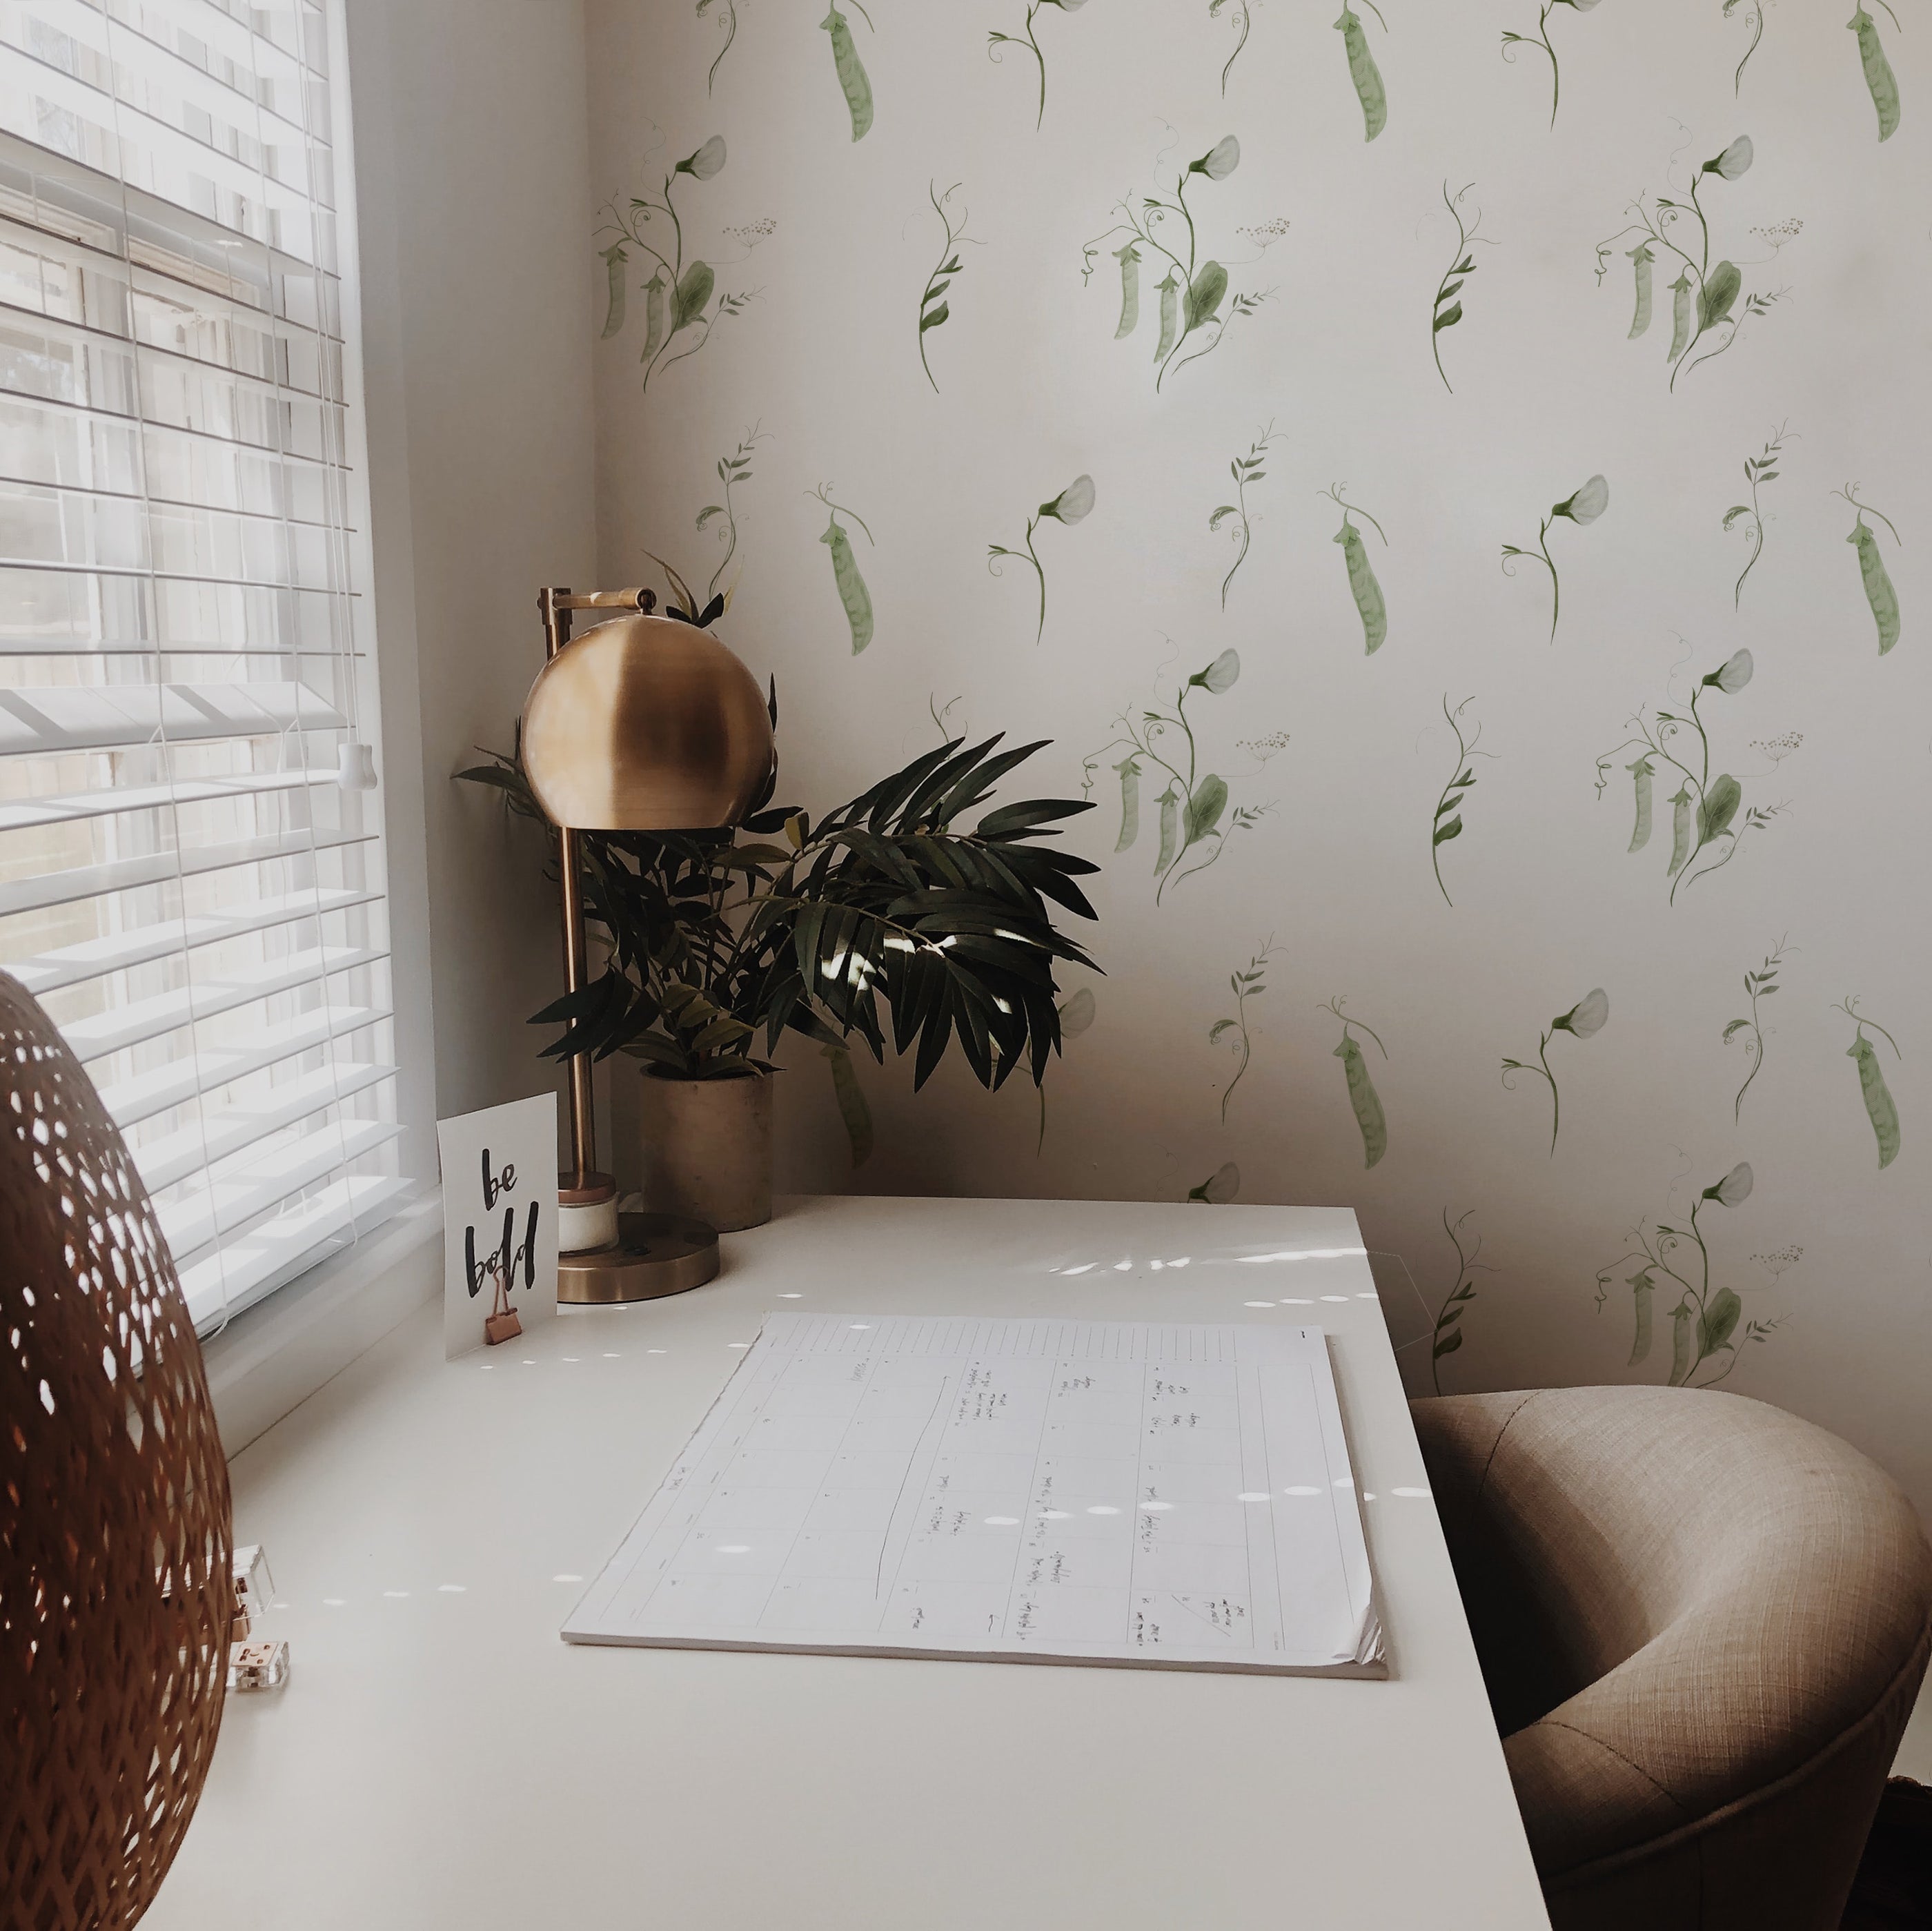 A cozy workspace corner illuminated by natural light filtering through a window with blinds. The room features a distinctive wallpaper decorated with delicate snow pea illustrations in soft green tones. The desk holds a calendar, a brass lamp with a leafy plant, and a motivational card reading "be bold."